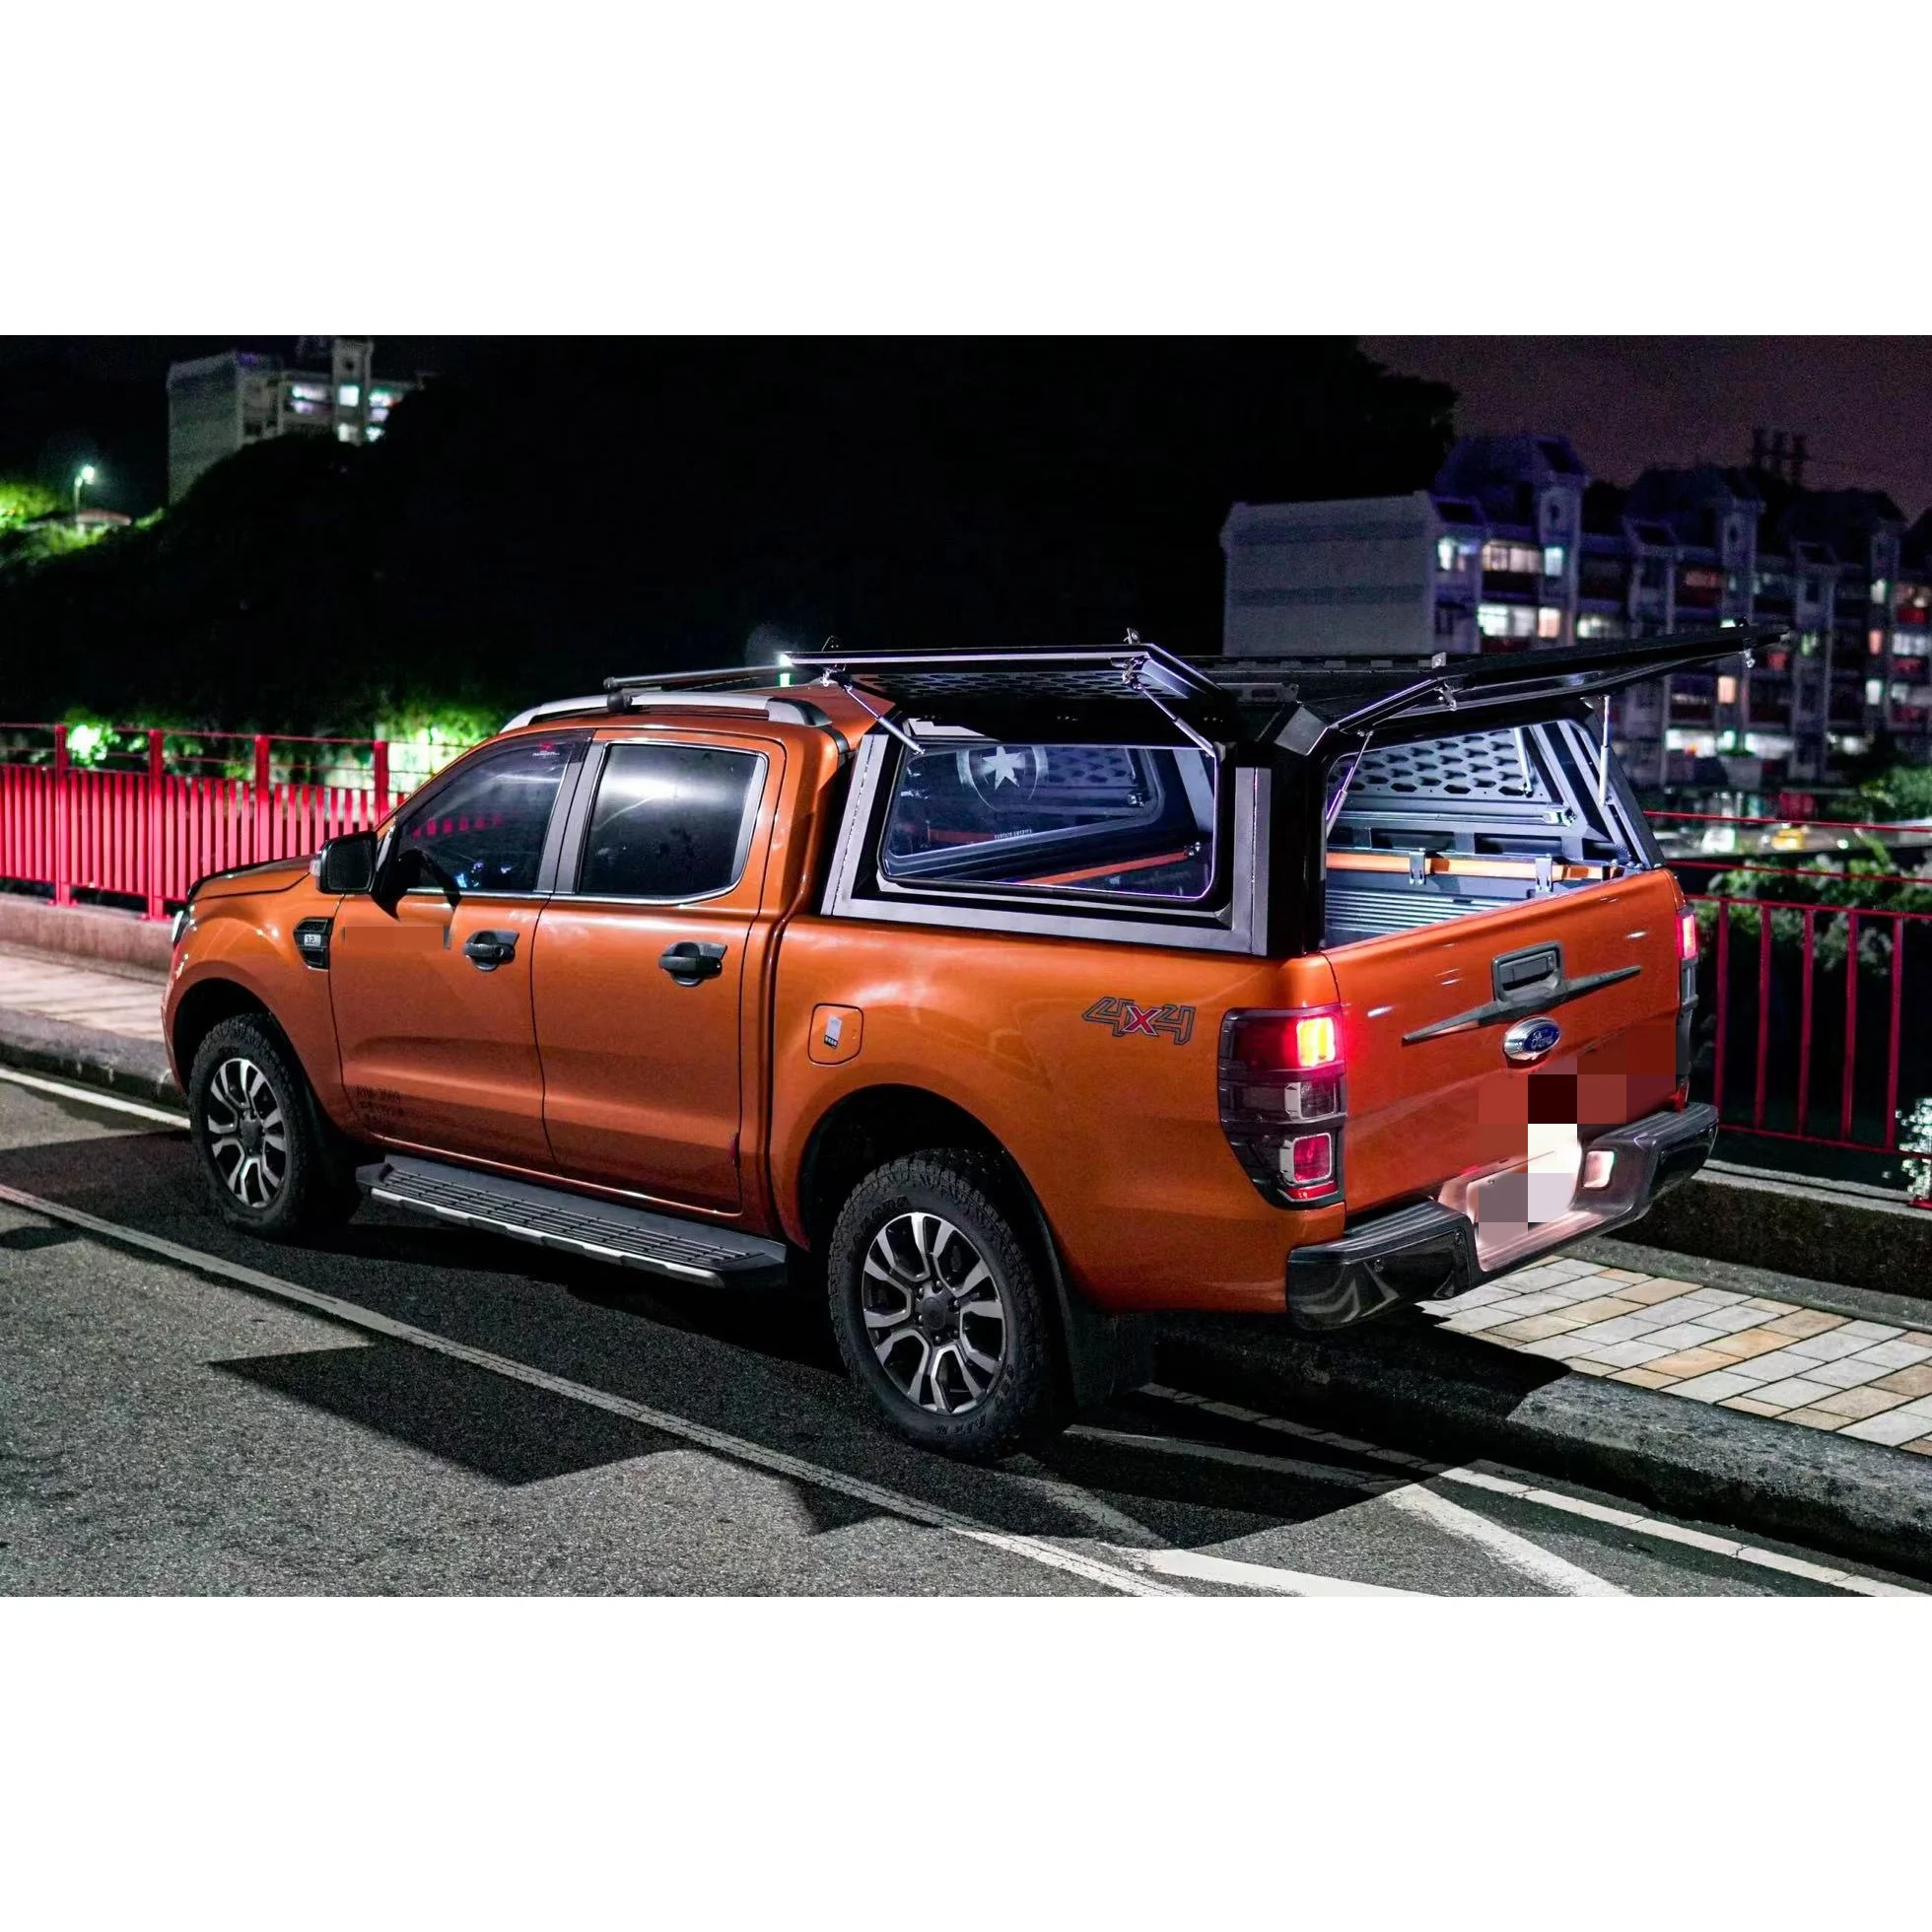 

With Windows Steel Dual Cab Hardtop 4x4 Pick Up Pickup Truck Bed Canopy Topper for Ford Ranger Canopy